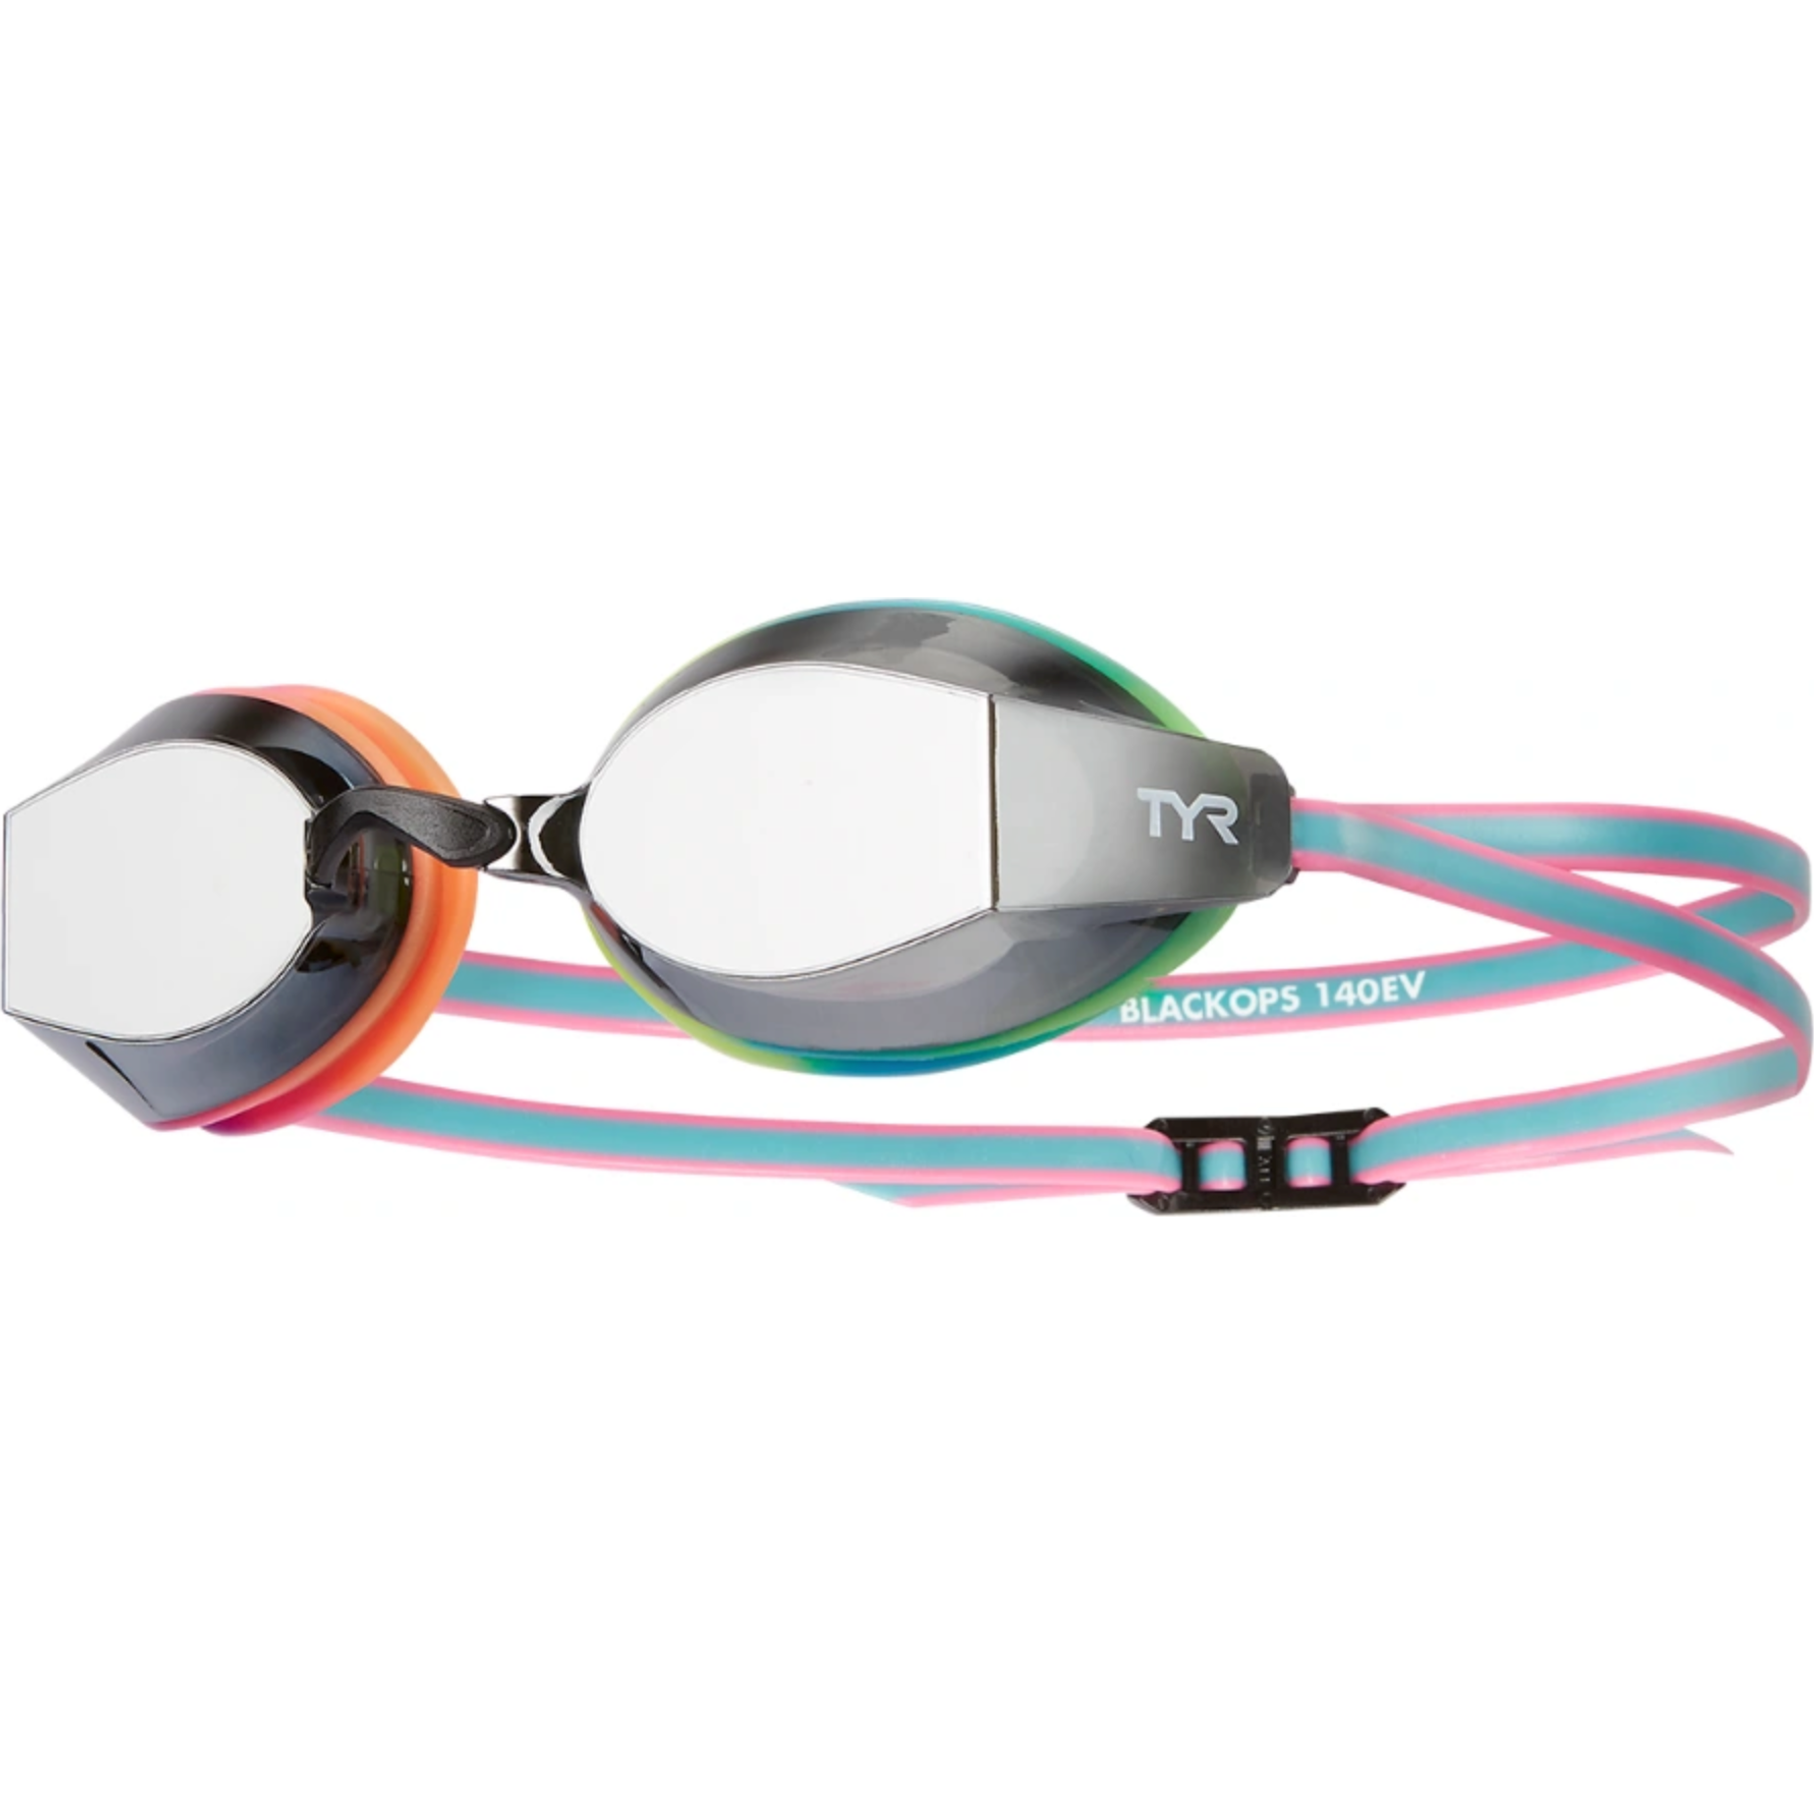 TYR Black Ops 140 EV Mirrored Goggle